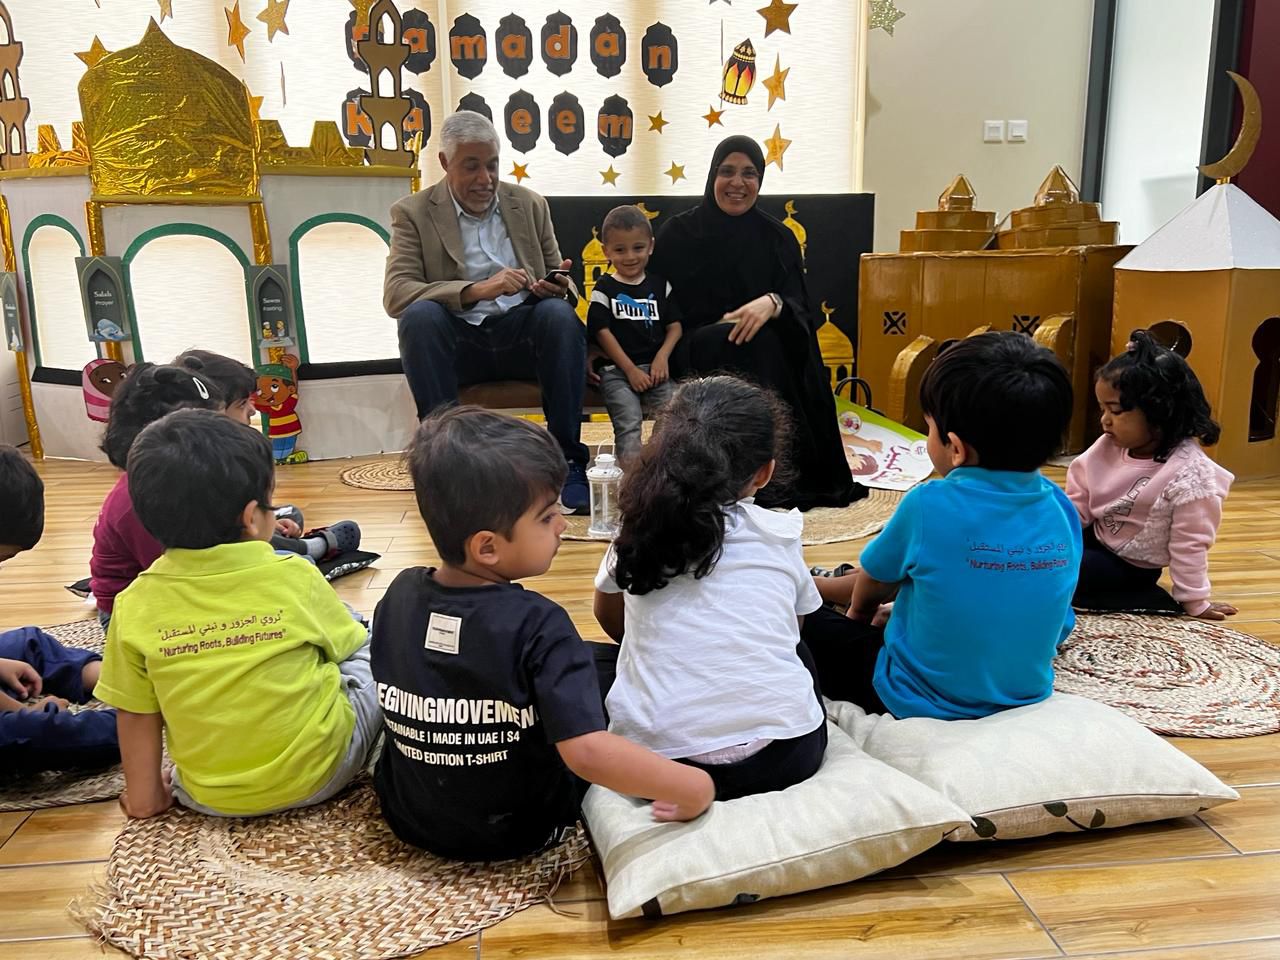 Ramadan at Future International Nursery schools in both Dubai and Sharjah is a profoundly important time of the year